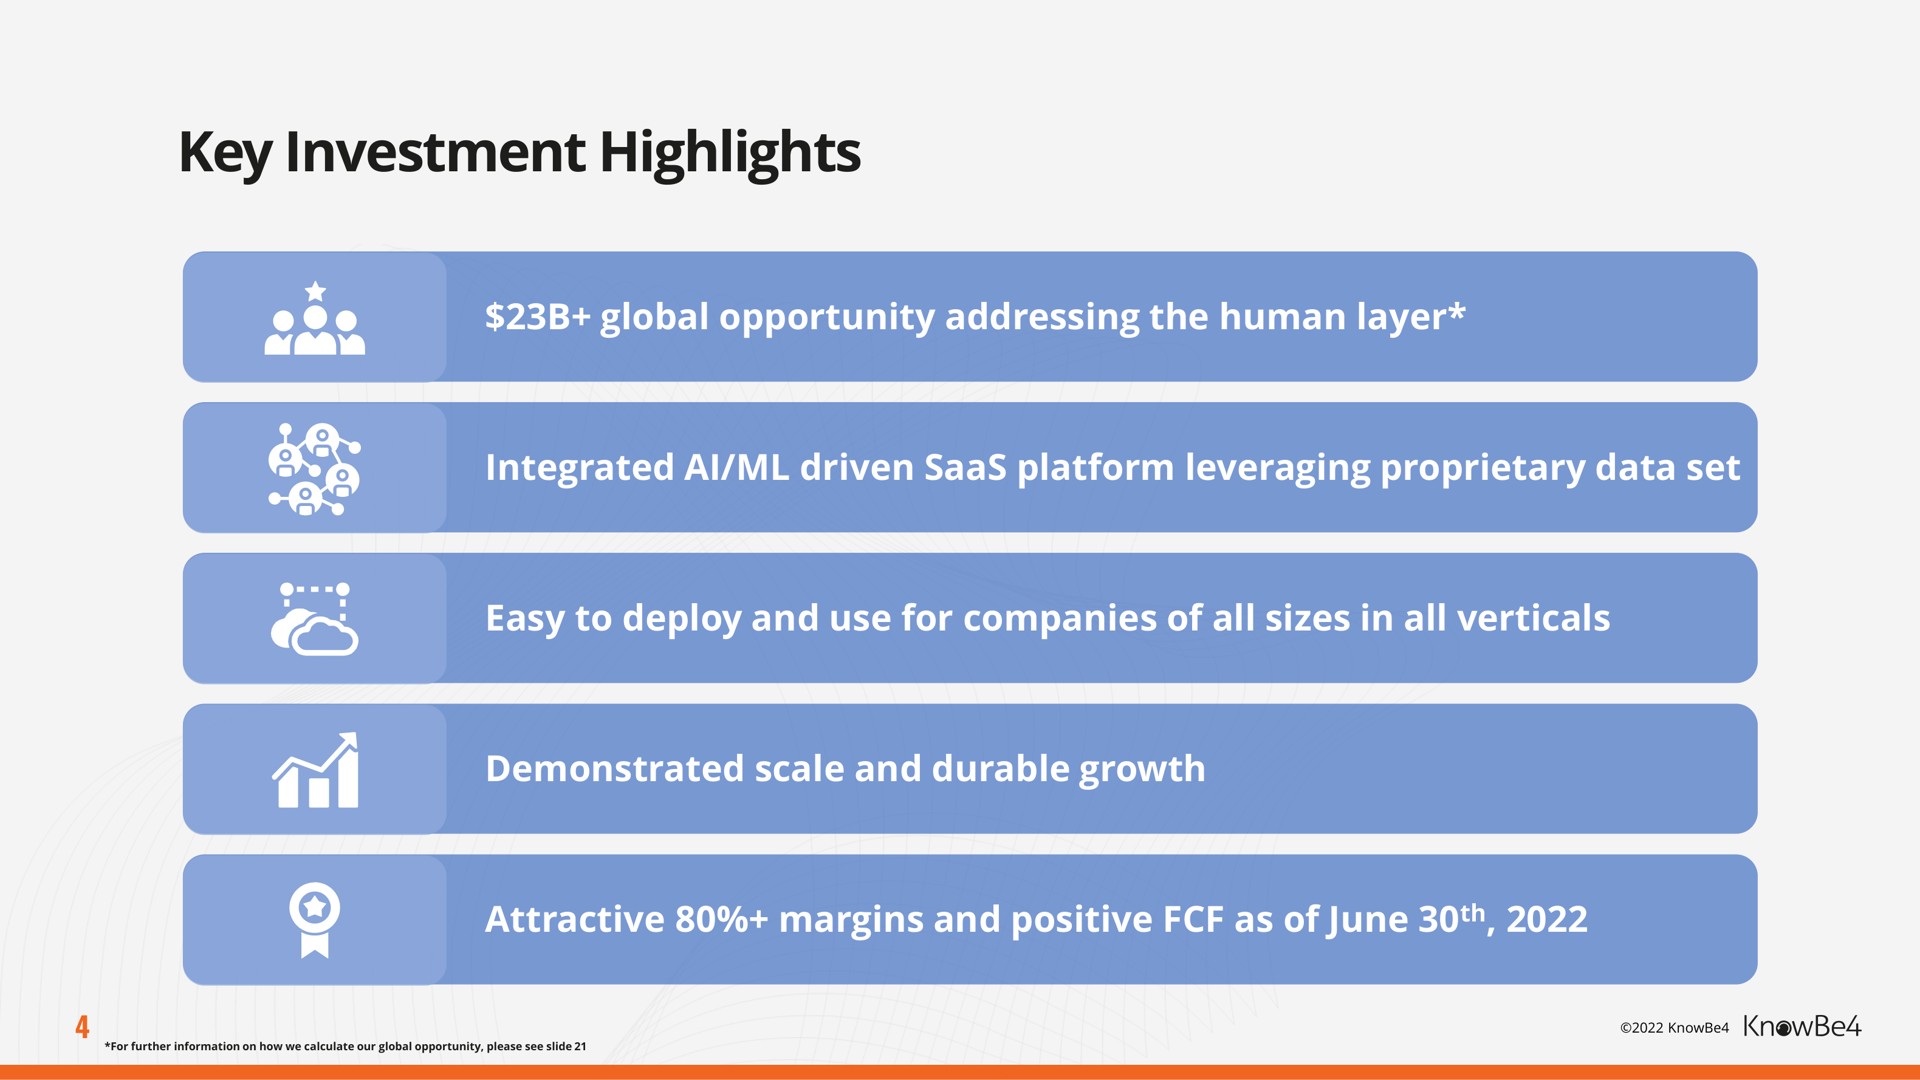 key investment highlights | KnowBe4